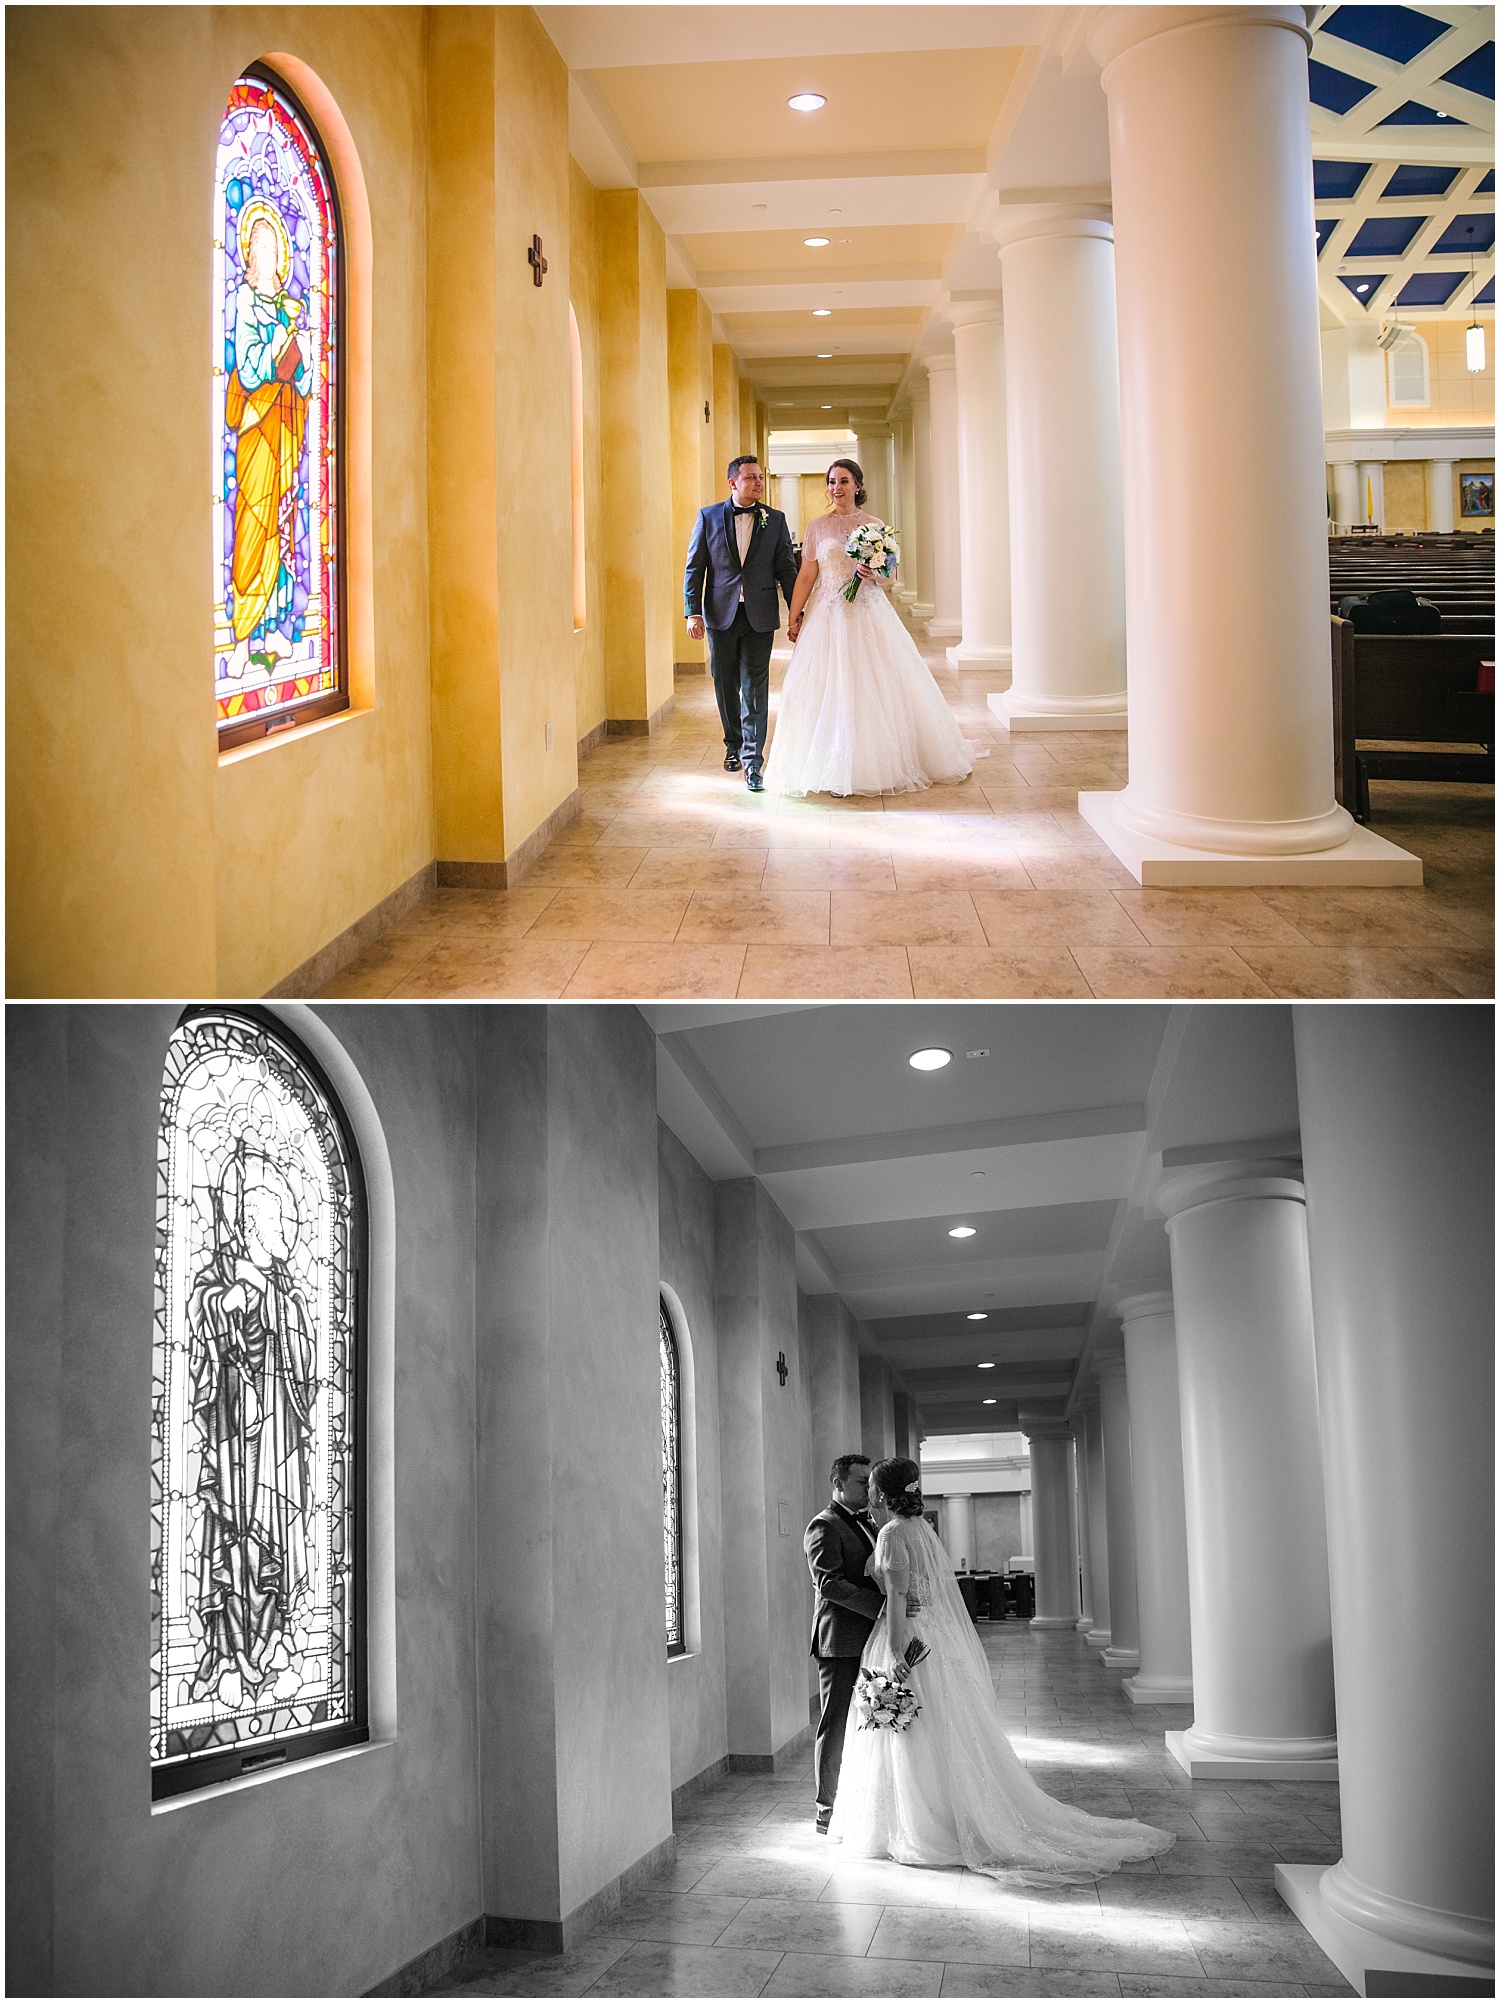 Bride and groom formal portraits at Church of the Incarnation Catholic Church wedding ceremony